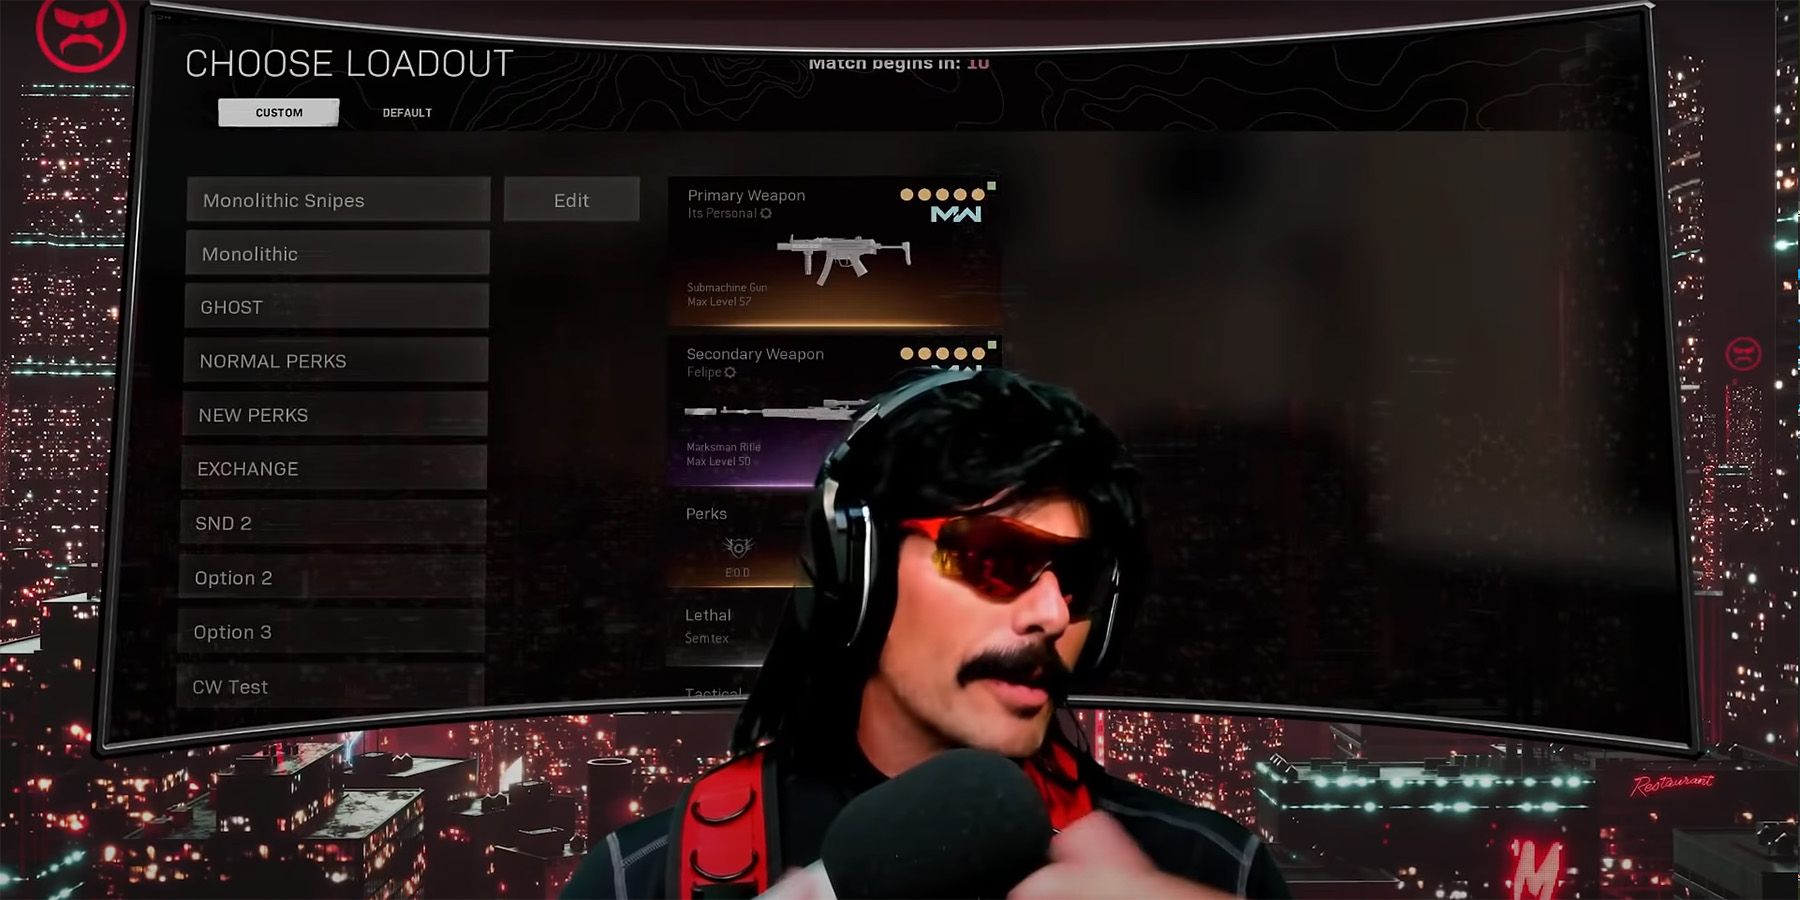 Dr Disrespect chatting during youtube stream